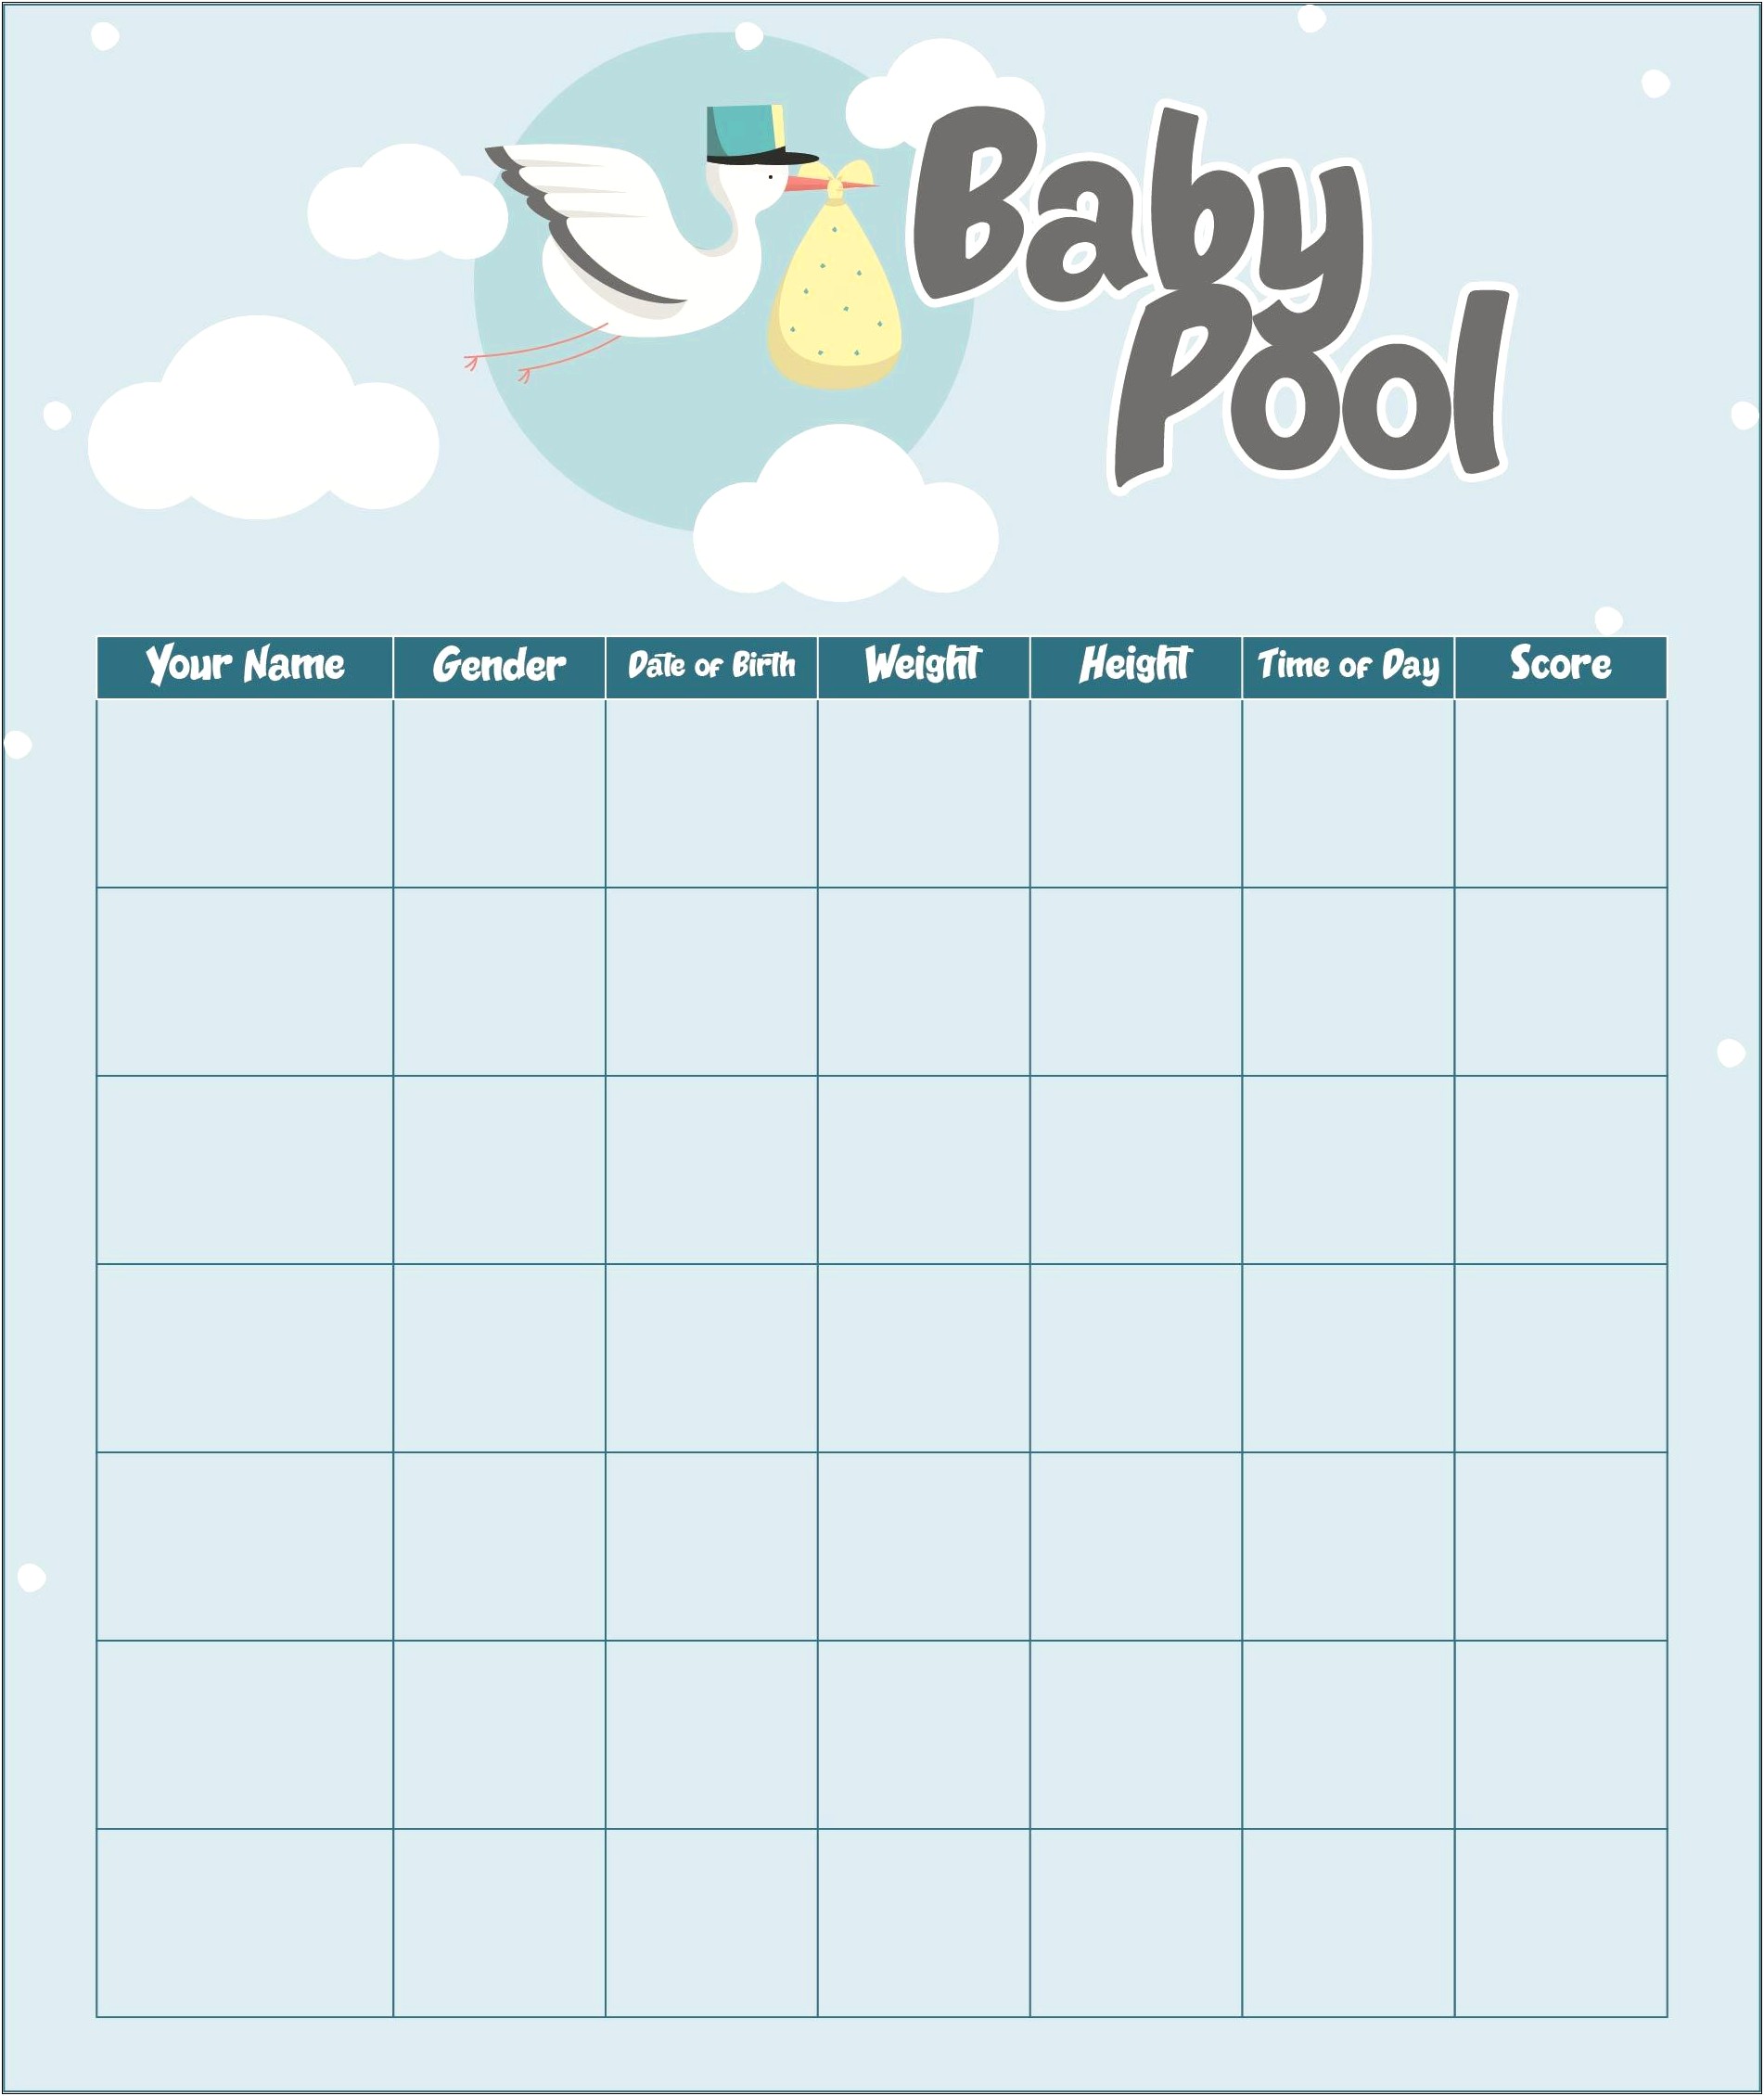 Guess The Baby Weight Printable Word Template